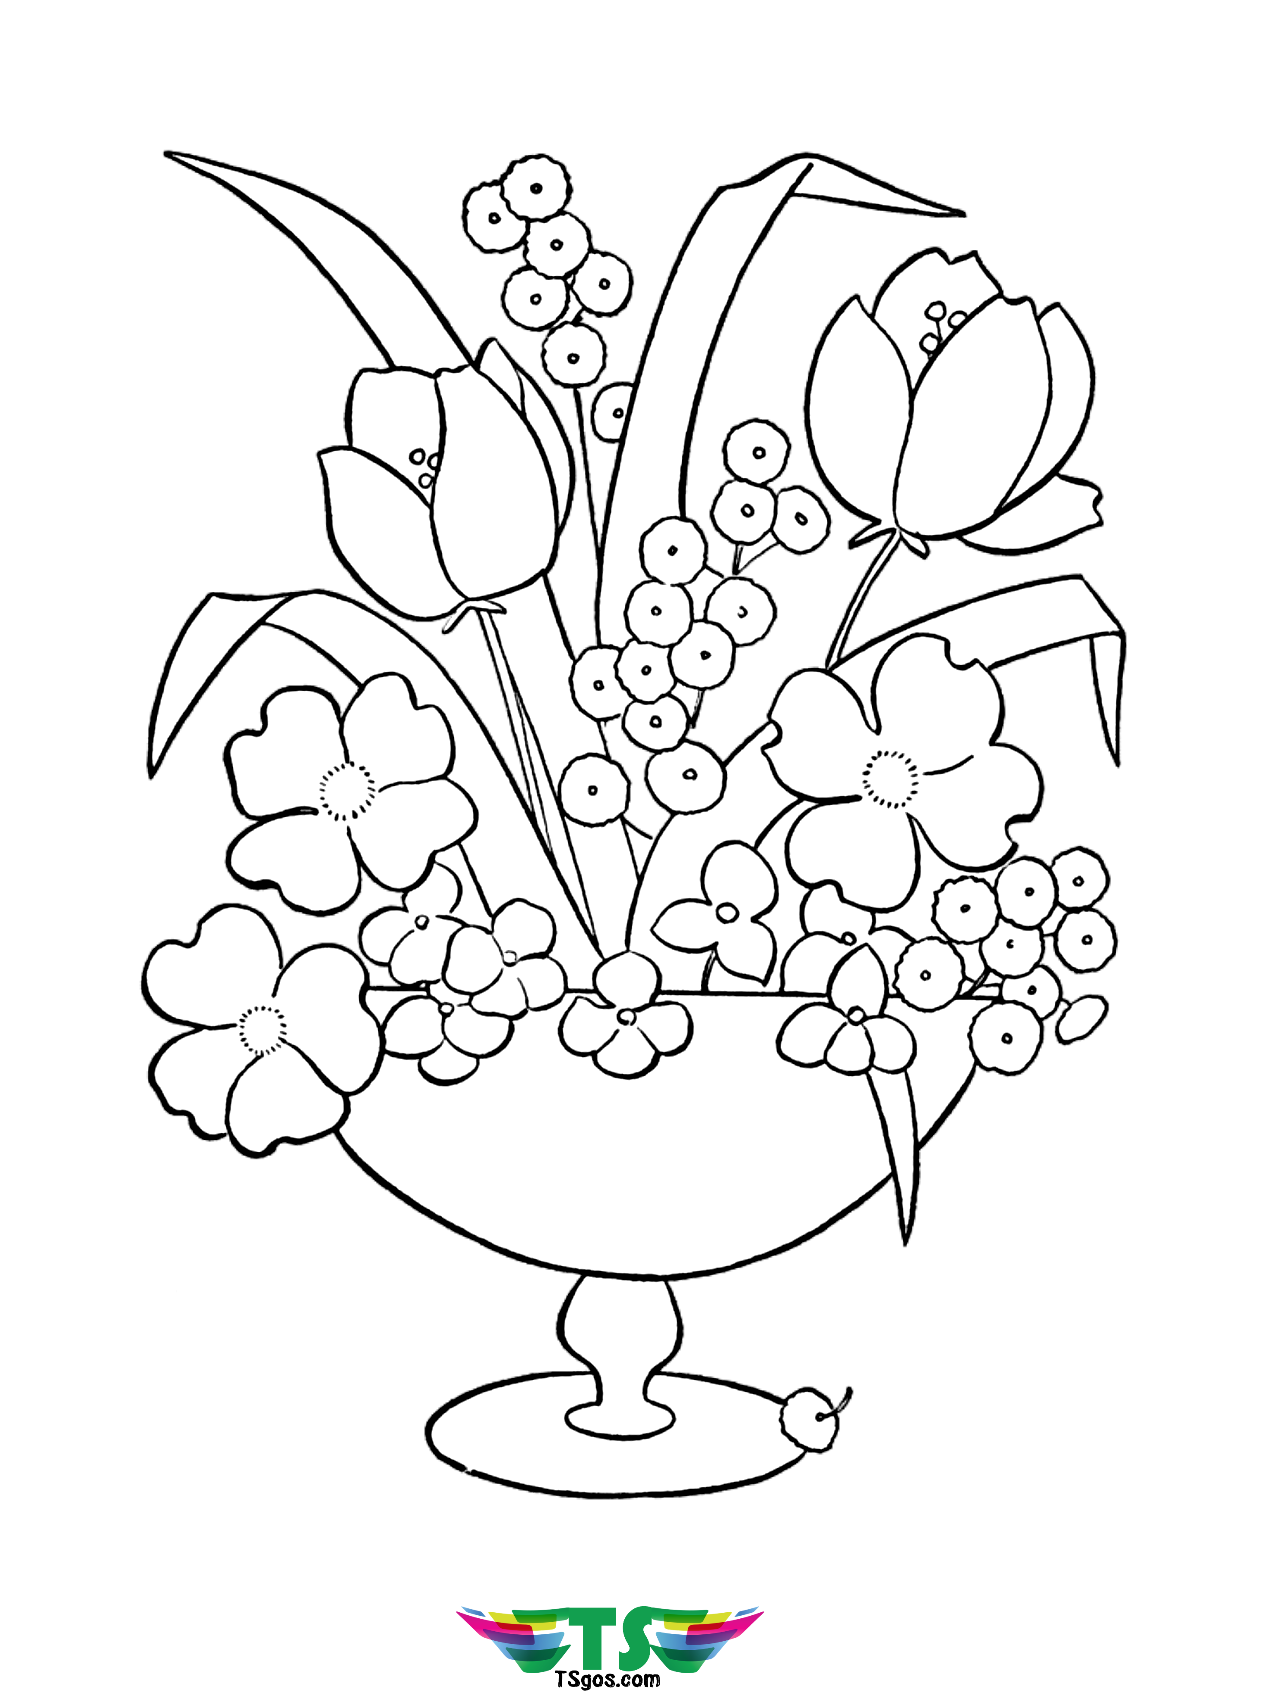 coloring-pages-flower-pot-flower-pot-coloring-pages-coloring-home-there-s-no-better-way-to